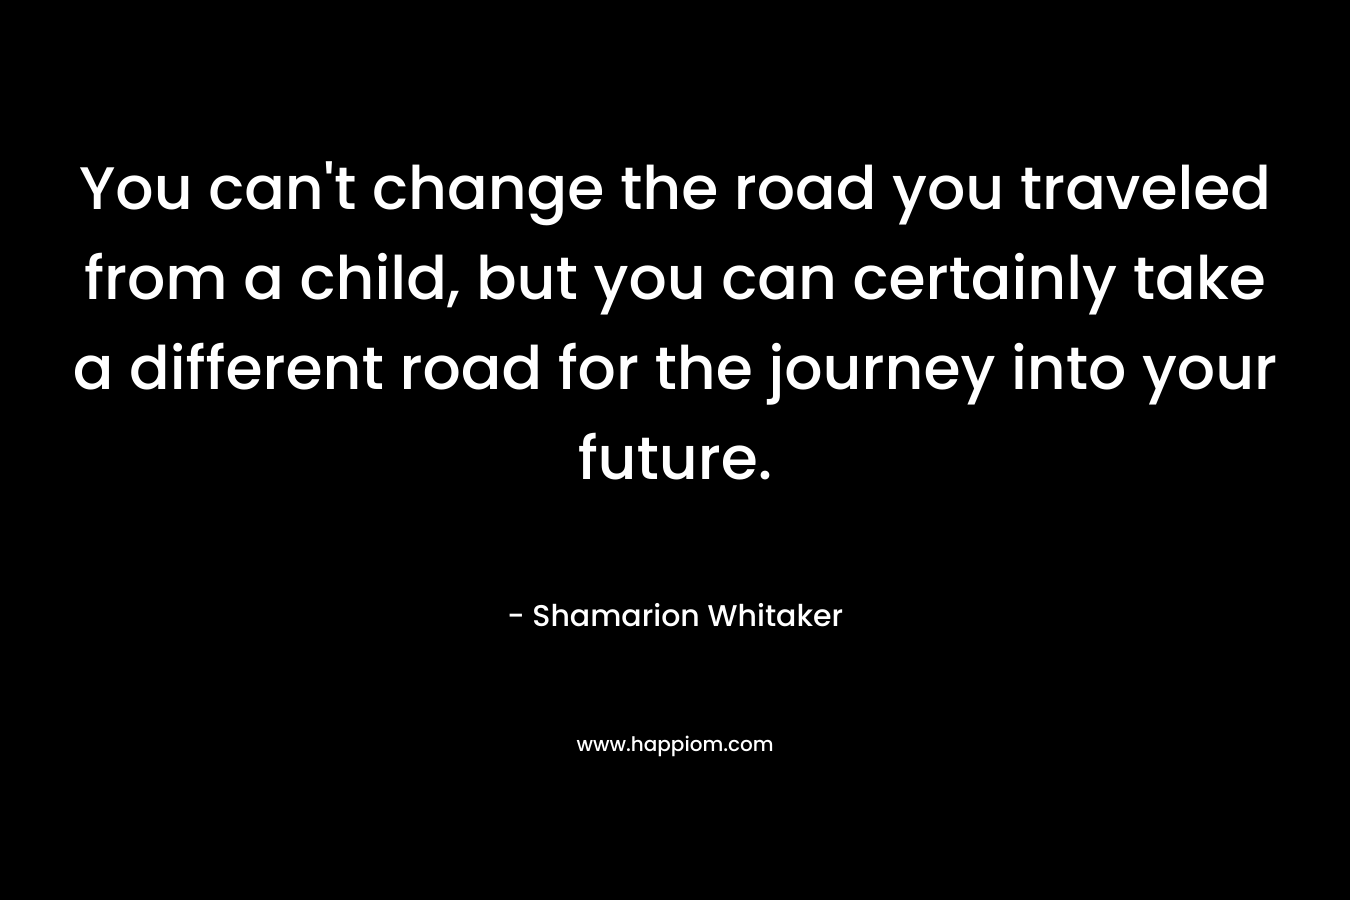 You can't change the road you traveled from a child, but you can certainly take a different road for the journey into your future.